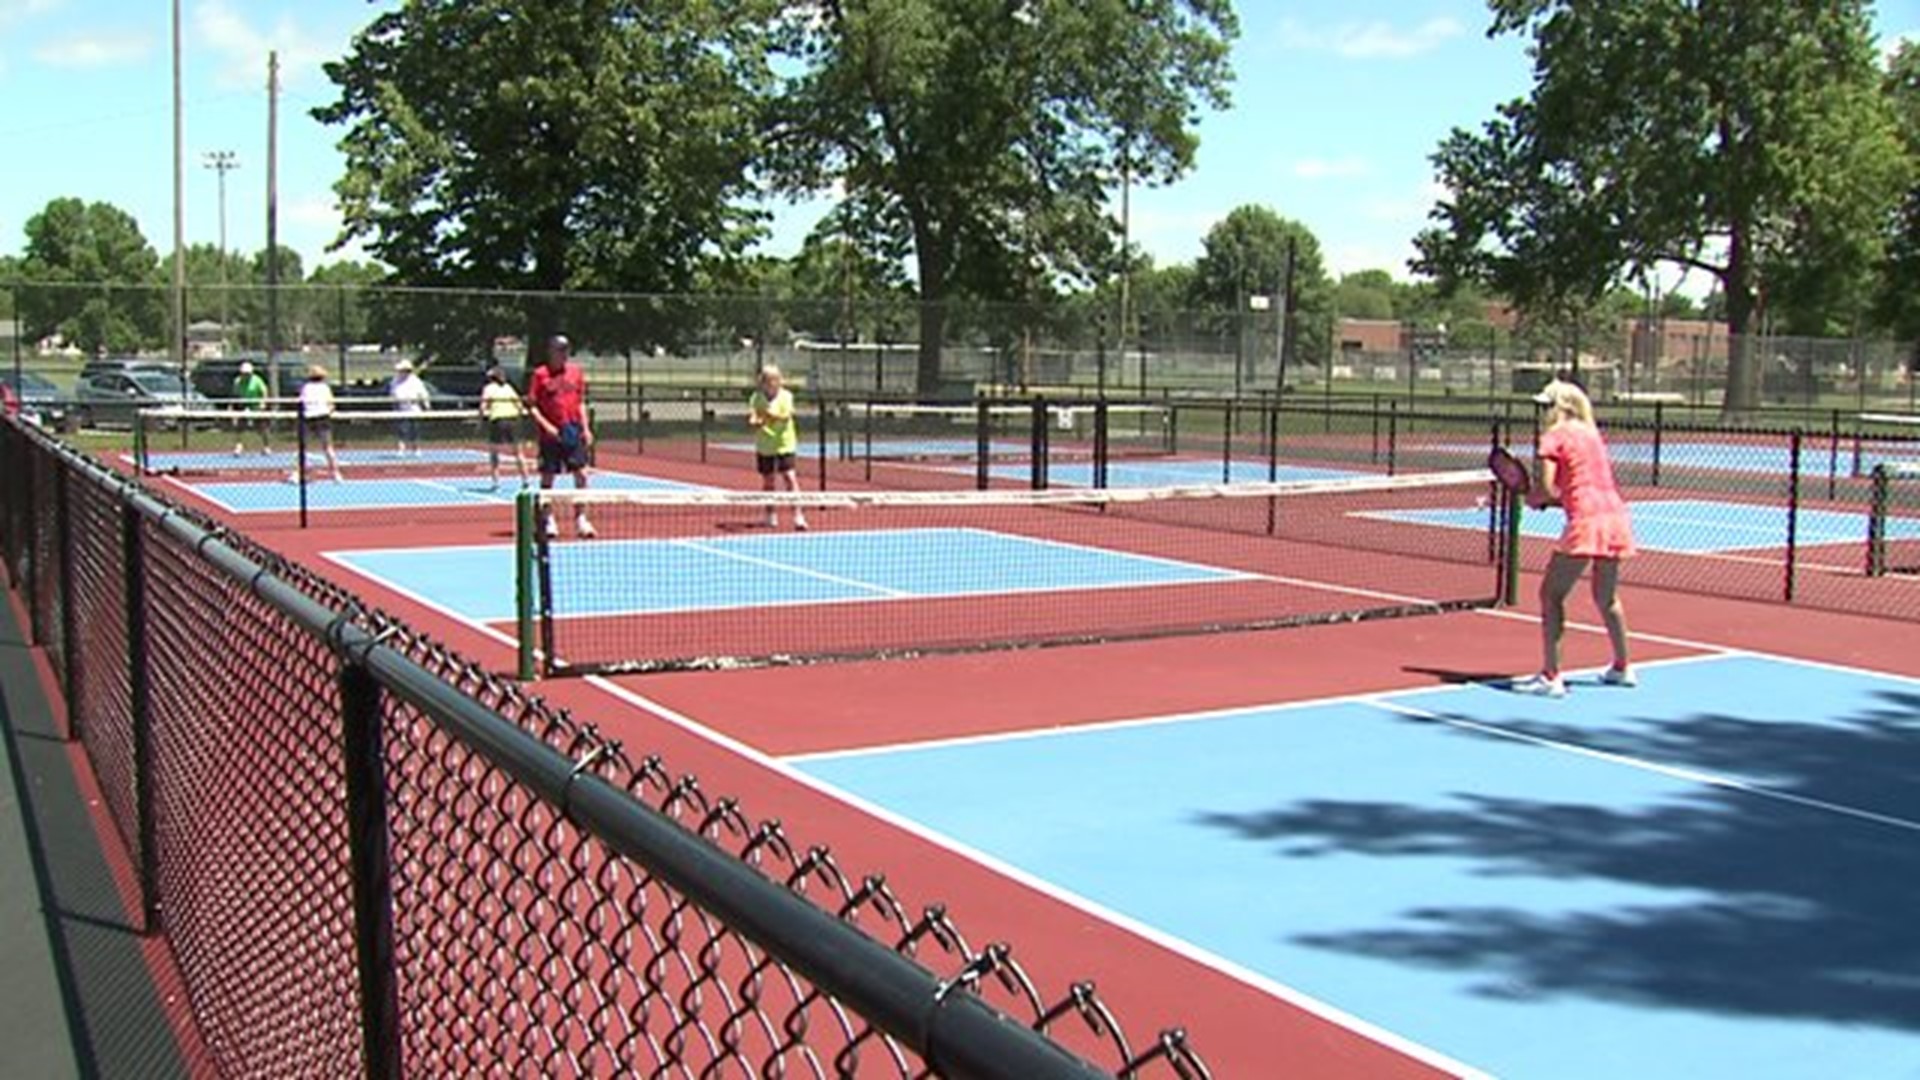 Eight new pickleball courts open in Davenport